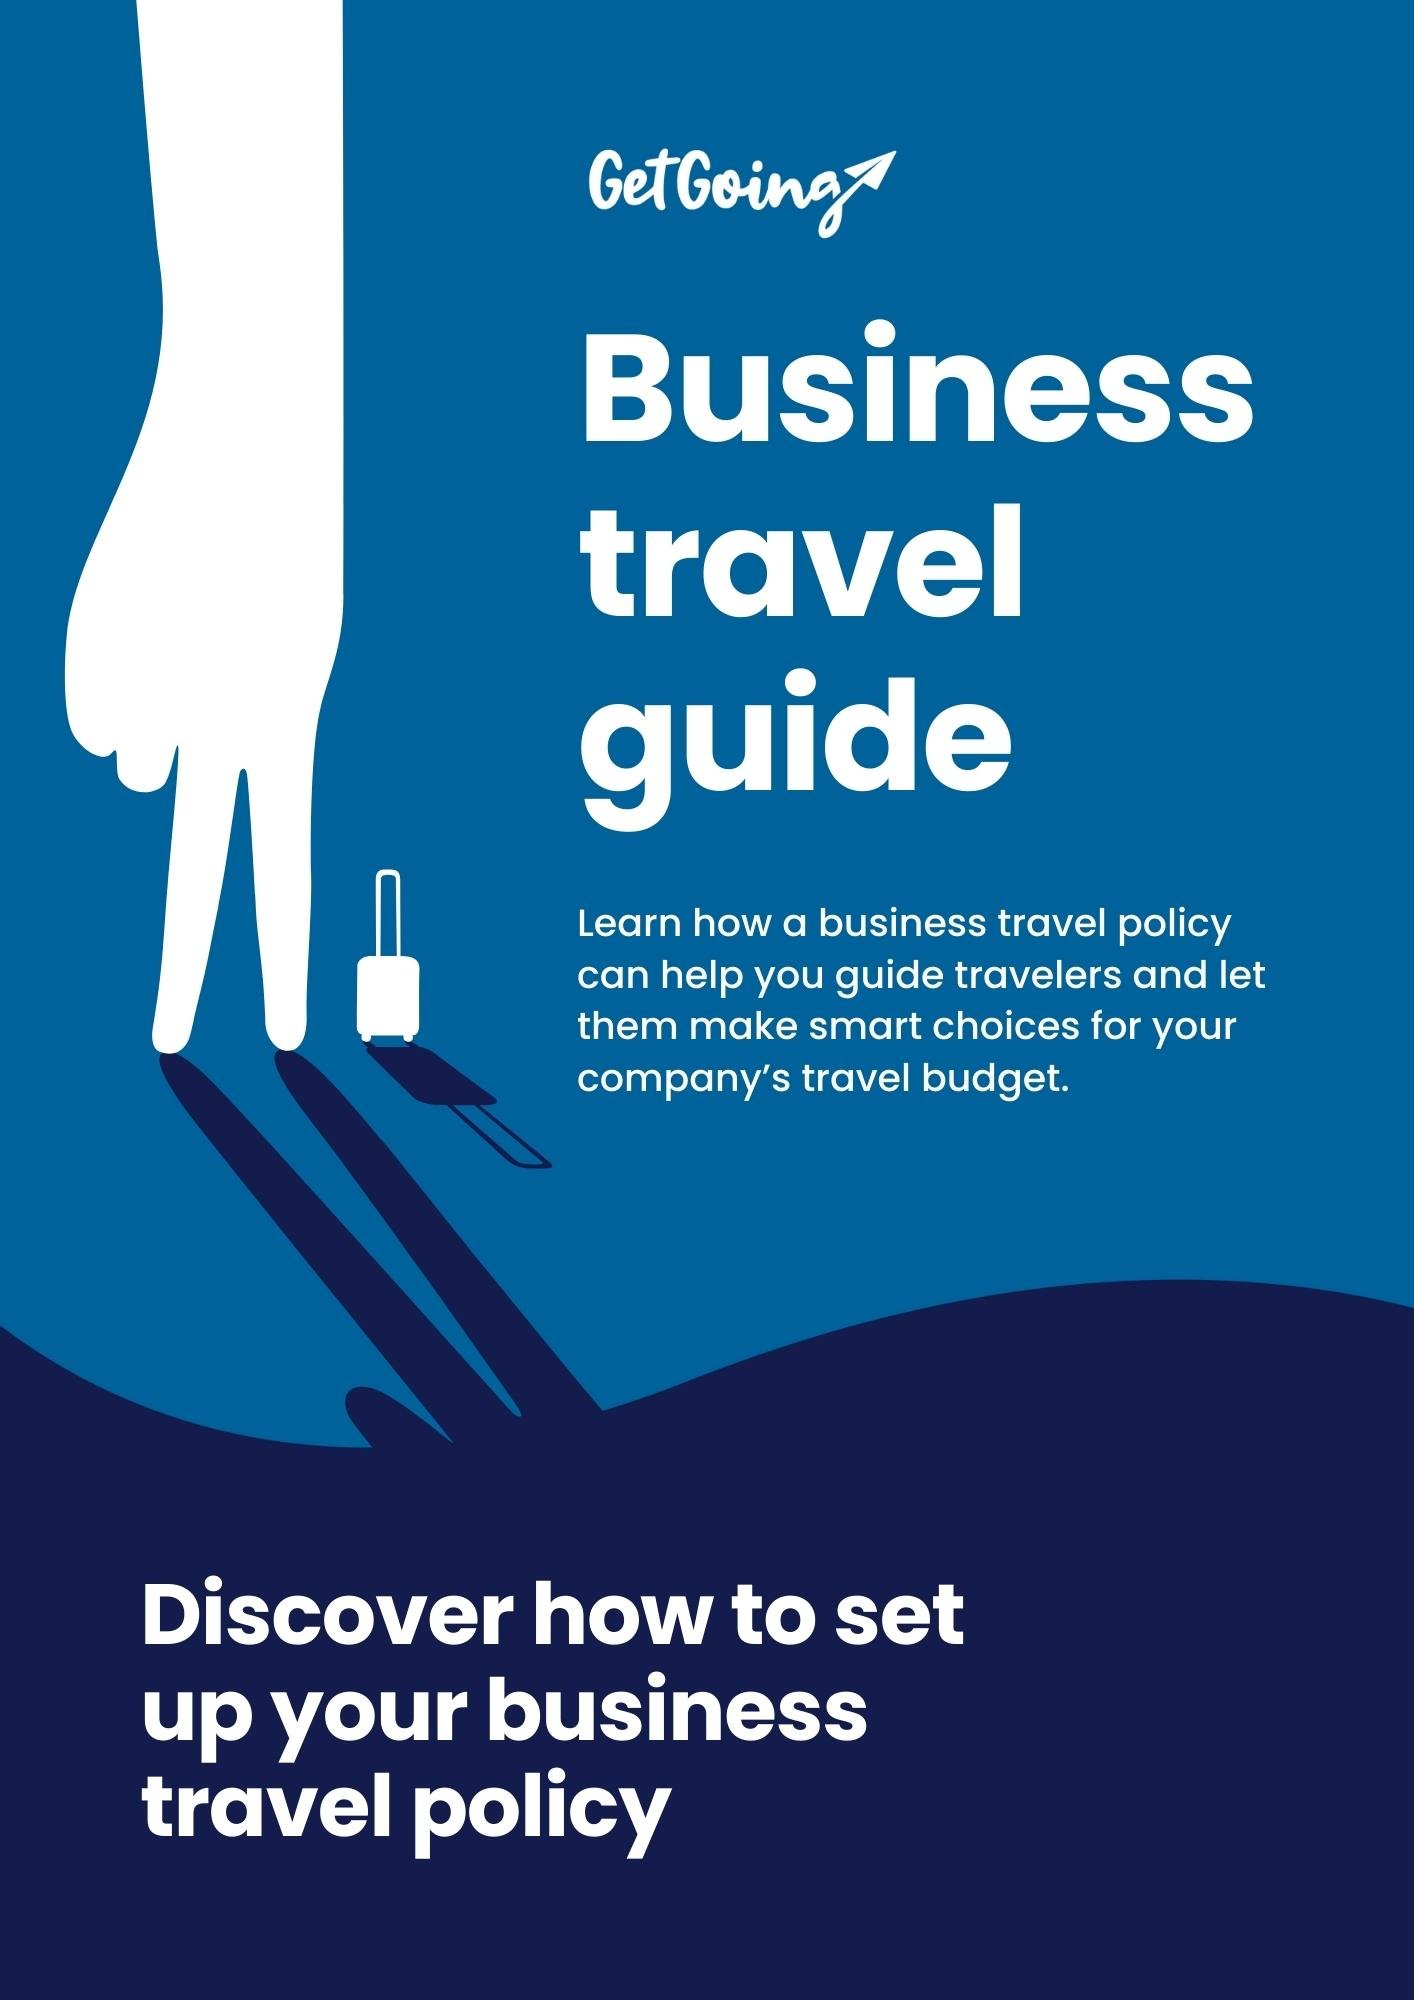 getgoing - E-book - How to set up your business travel policy